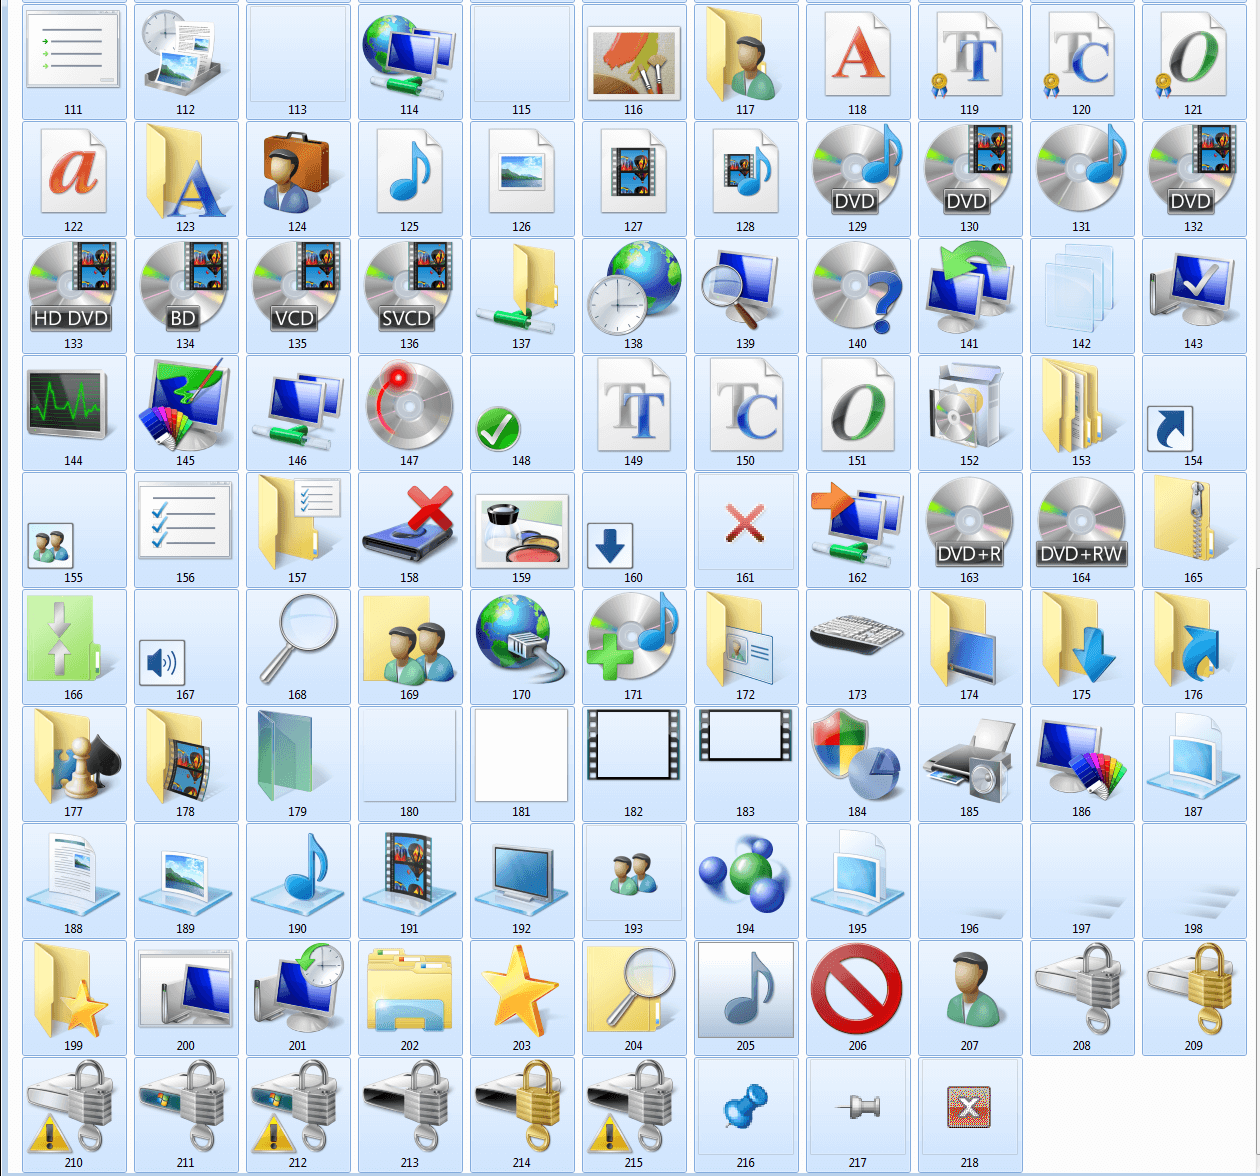 Windows 7 icons of imageres.dll (2/2)